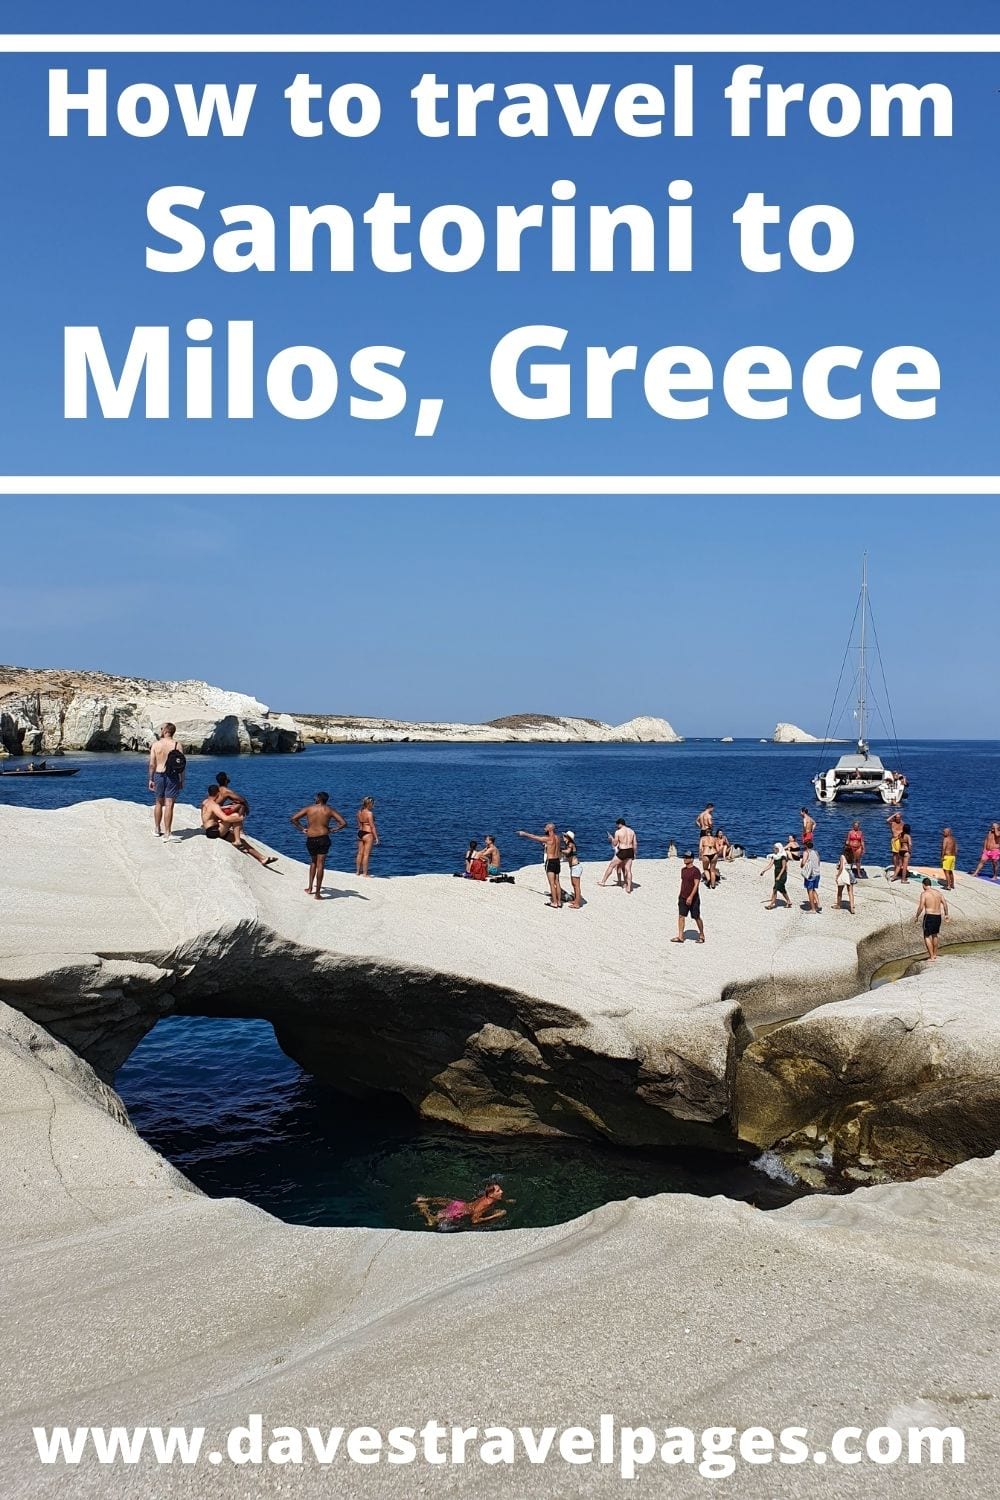 How to travel from Santorini to Milos by ferry